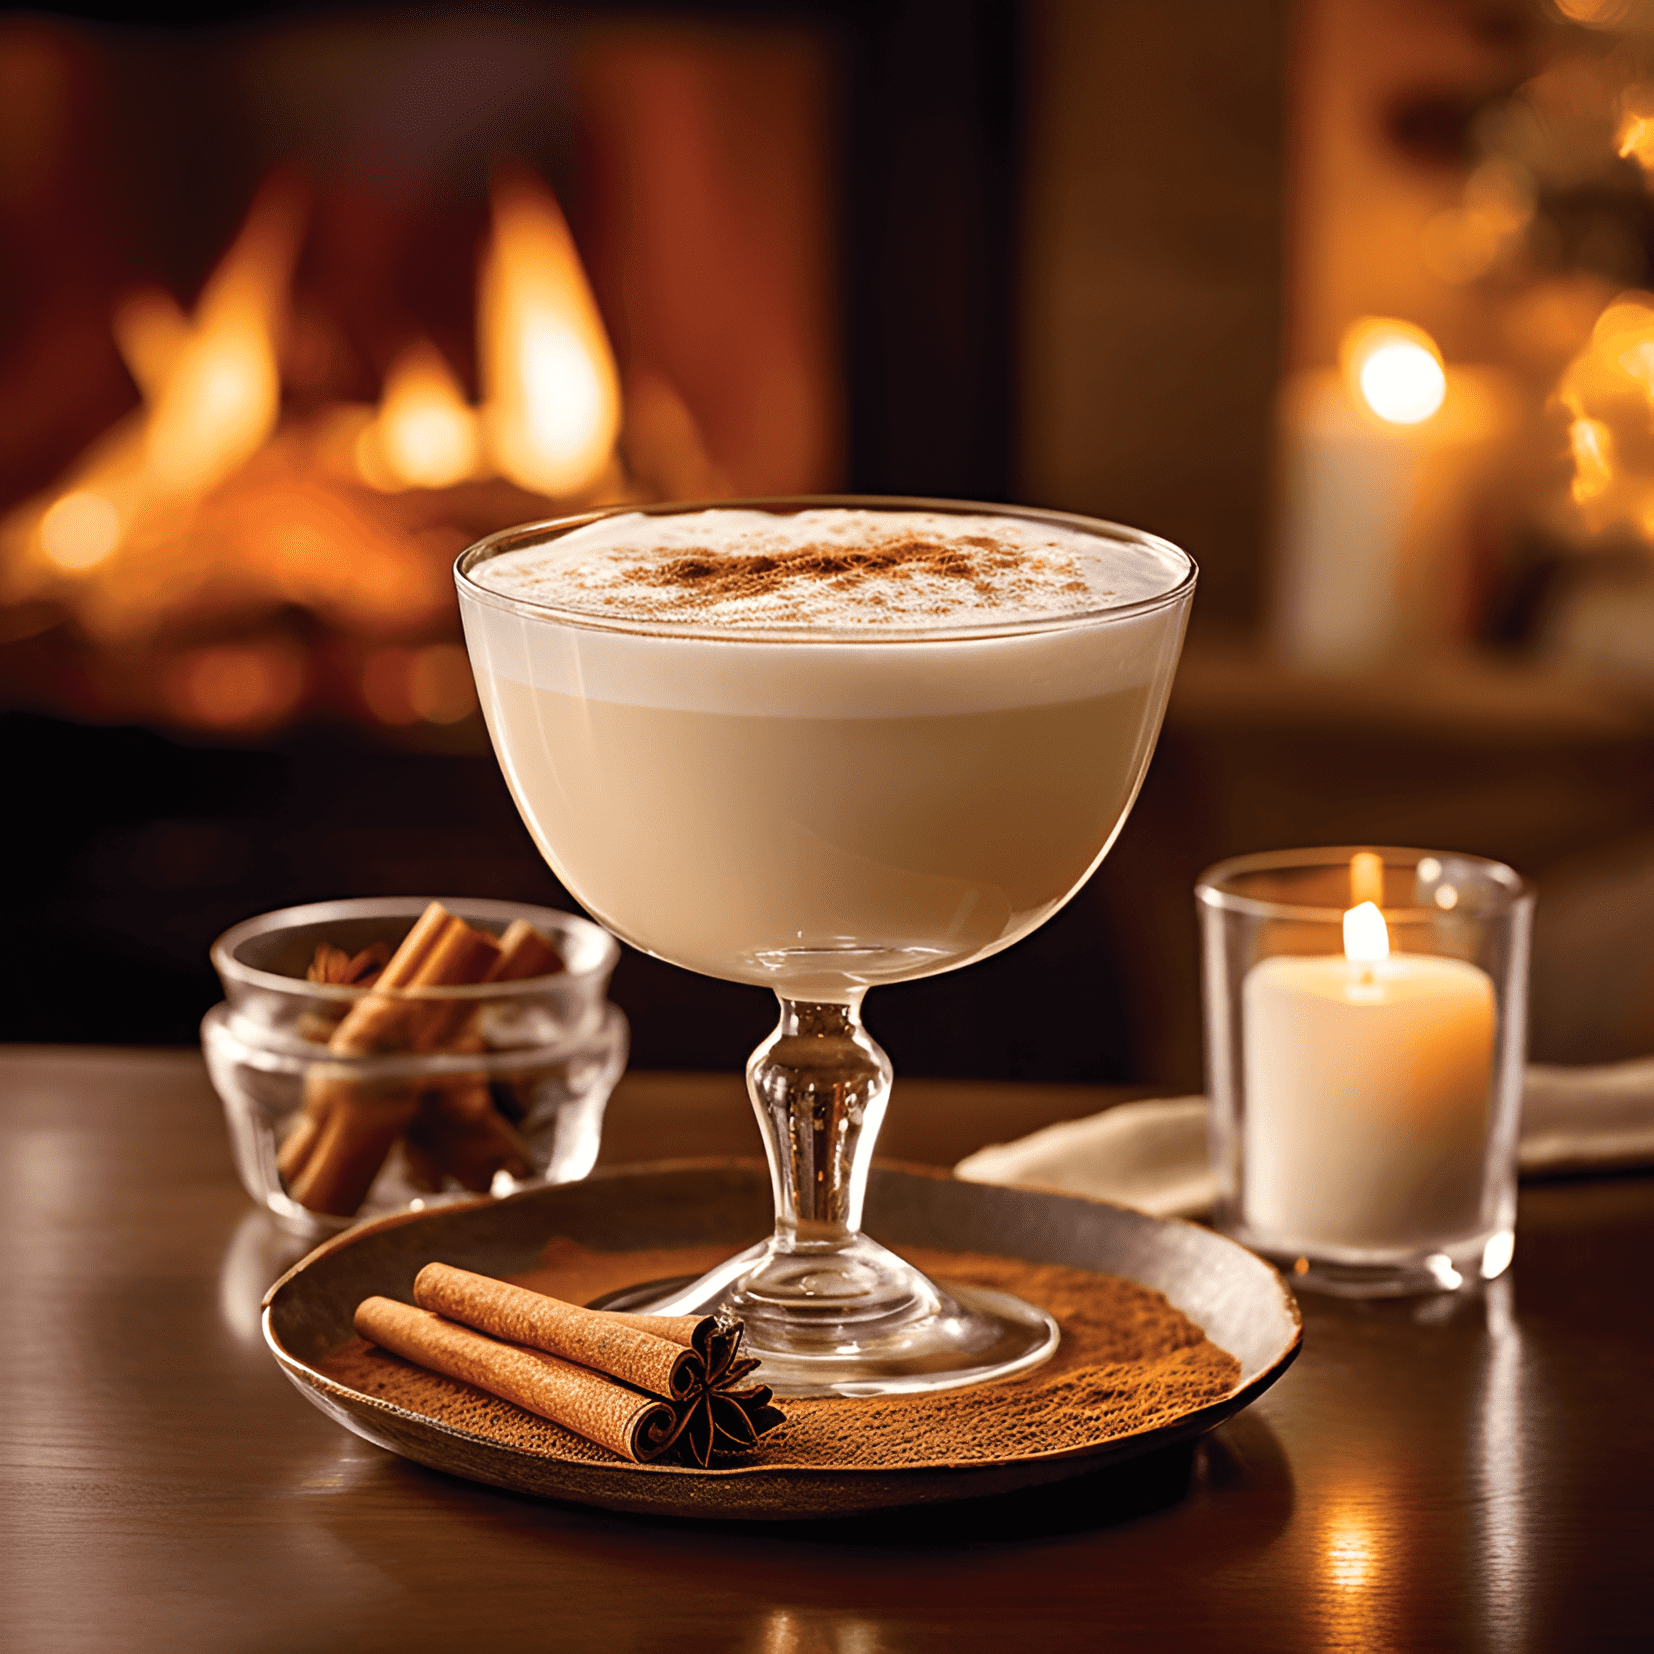 Eggnog is a sweet, creamy, and rich drink with a velvety texture. It has a subtle hint of nutmeg and cinnamon, giving it a warm and comforting flavor. The drink is mildly boozy, with a smooth and gentle finish.